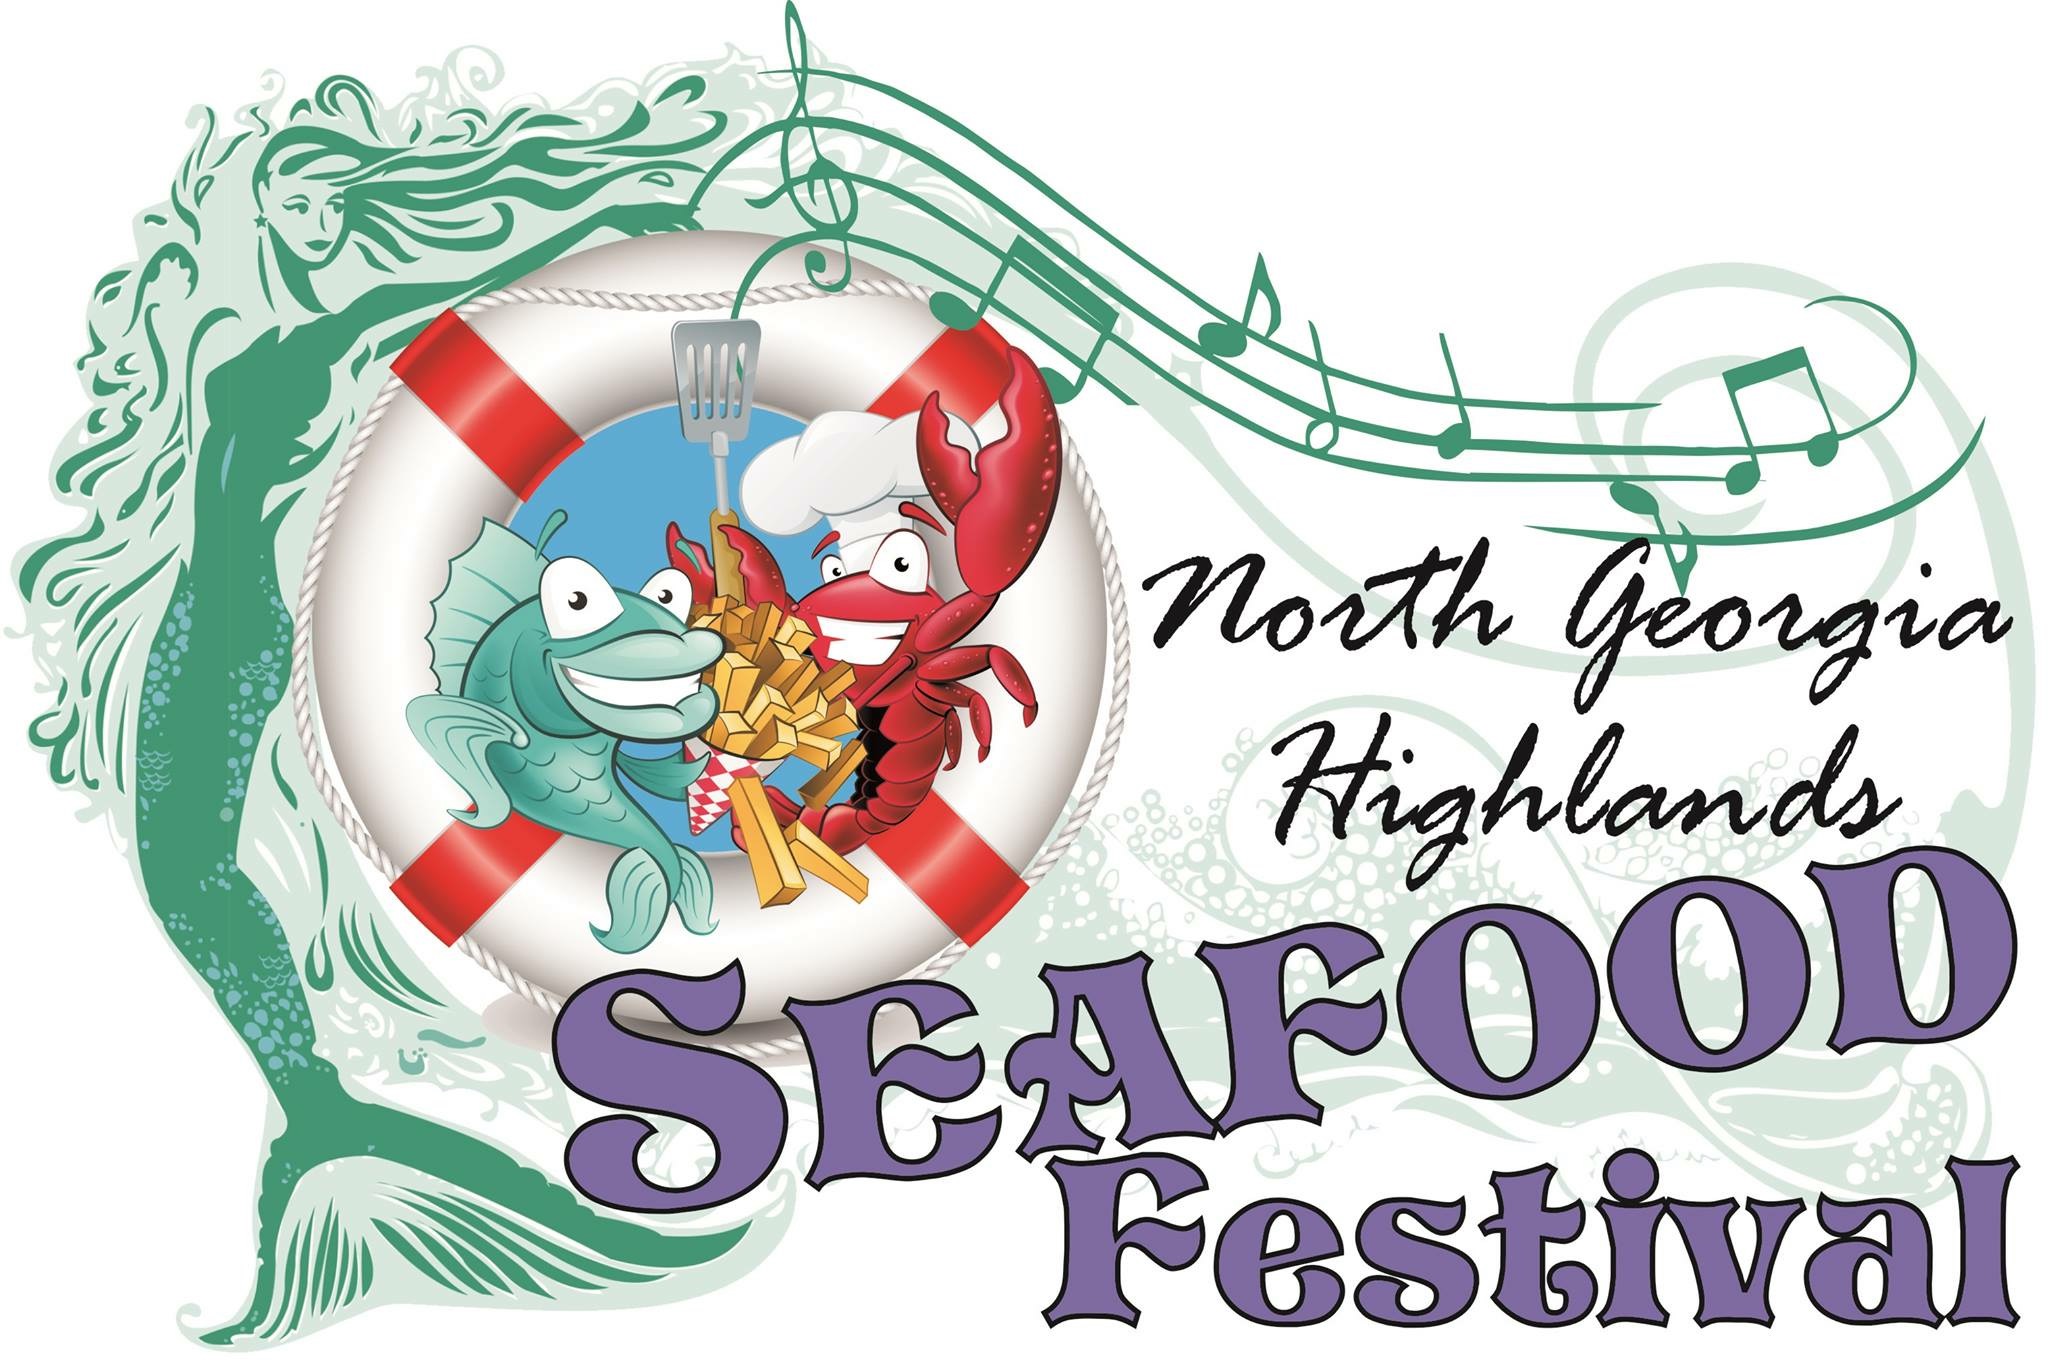 NORTH GA HIGHLAND SEAFOOD FESTIVAL FINE ARTS AND CRAFTS YOUNG HARRIS